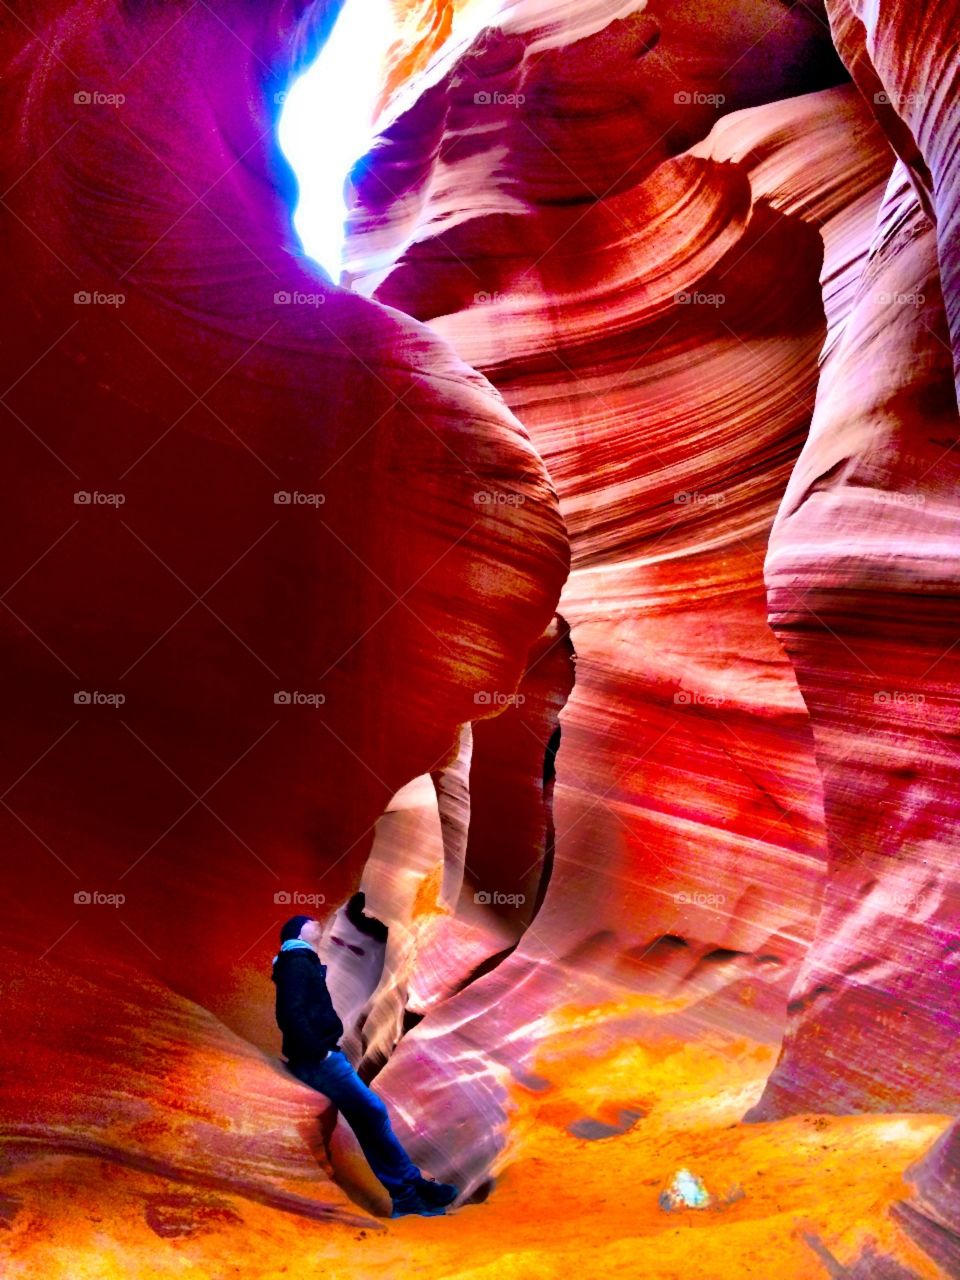 Down under . Antelope canyons 